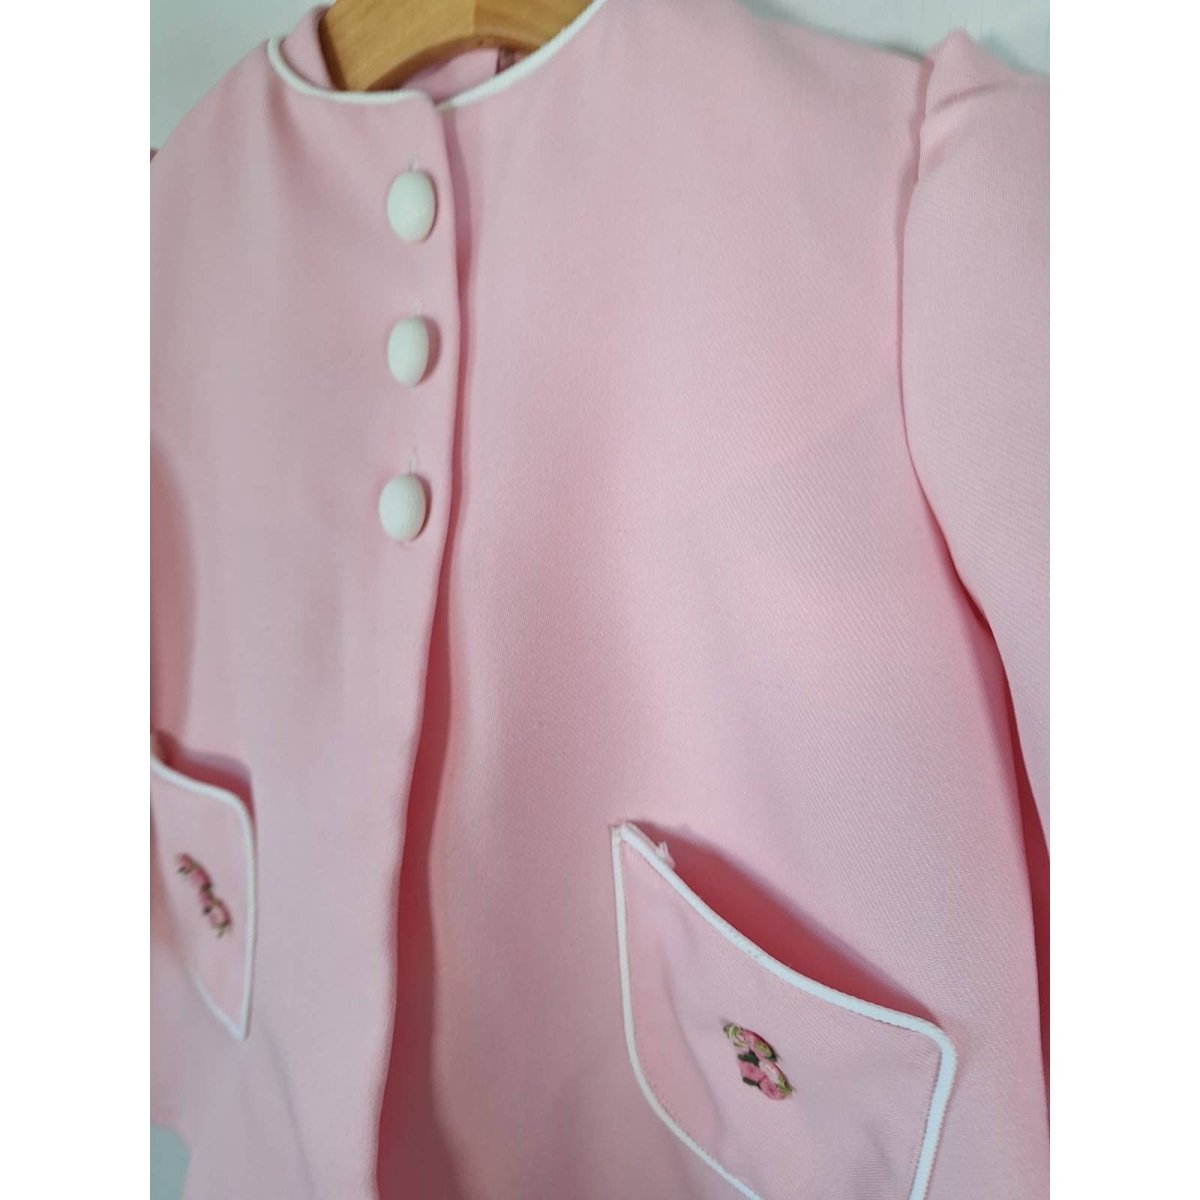 Vintage Girls 70s Pink Dress & Jacket Set Chest 24" Length 17" Toddler 2-3T - themallvintage The Mall Vintage